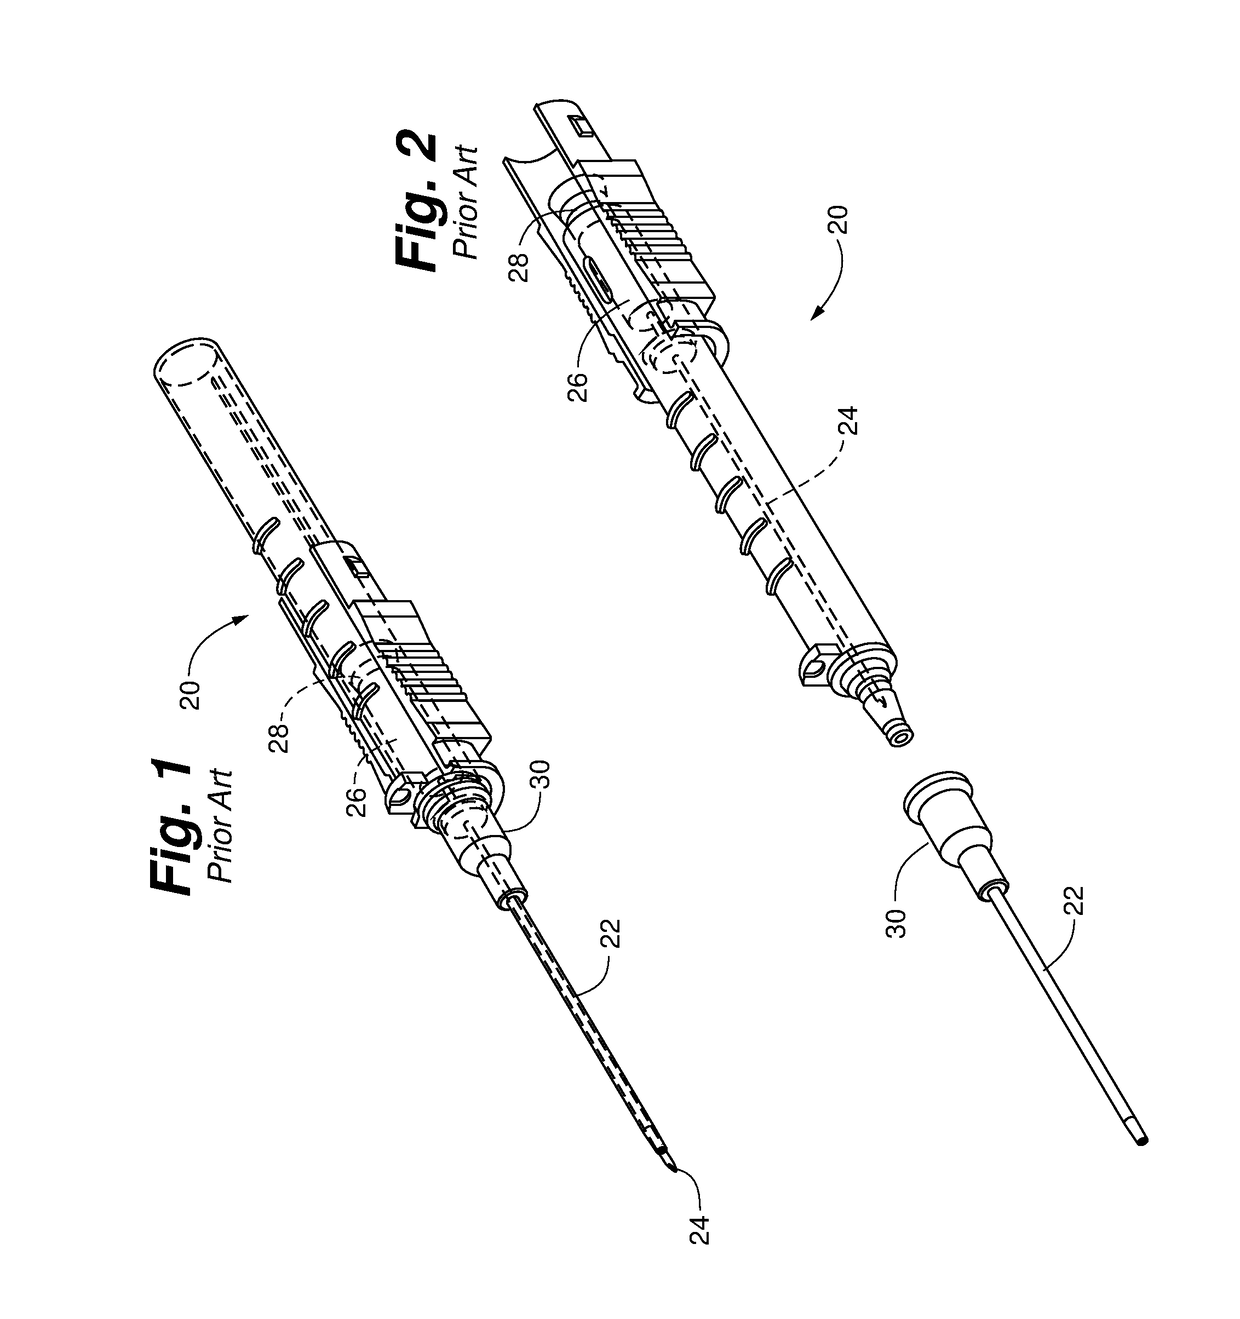 Needle assembly with diagnostic analysis provisions